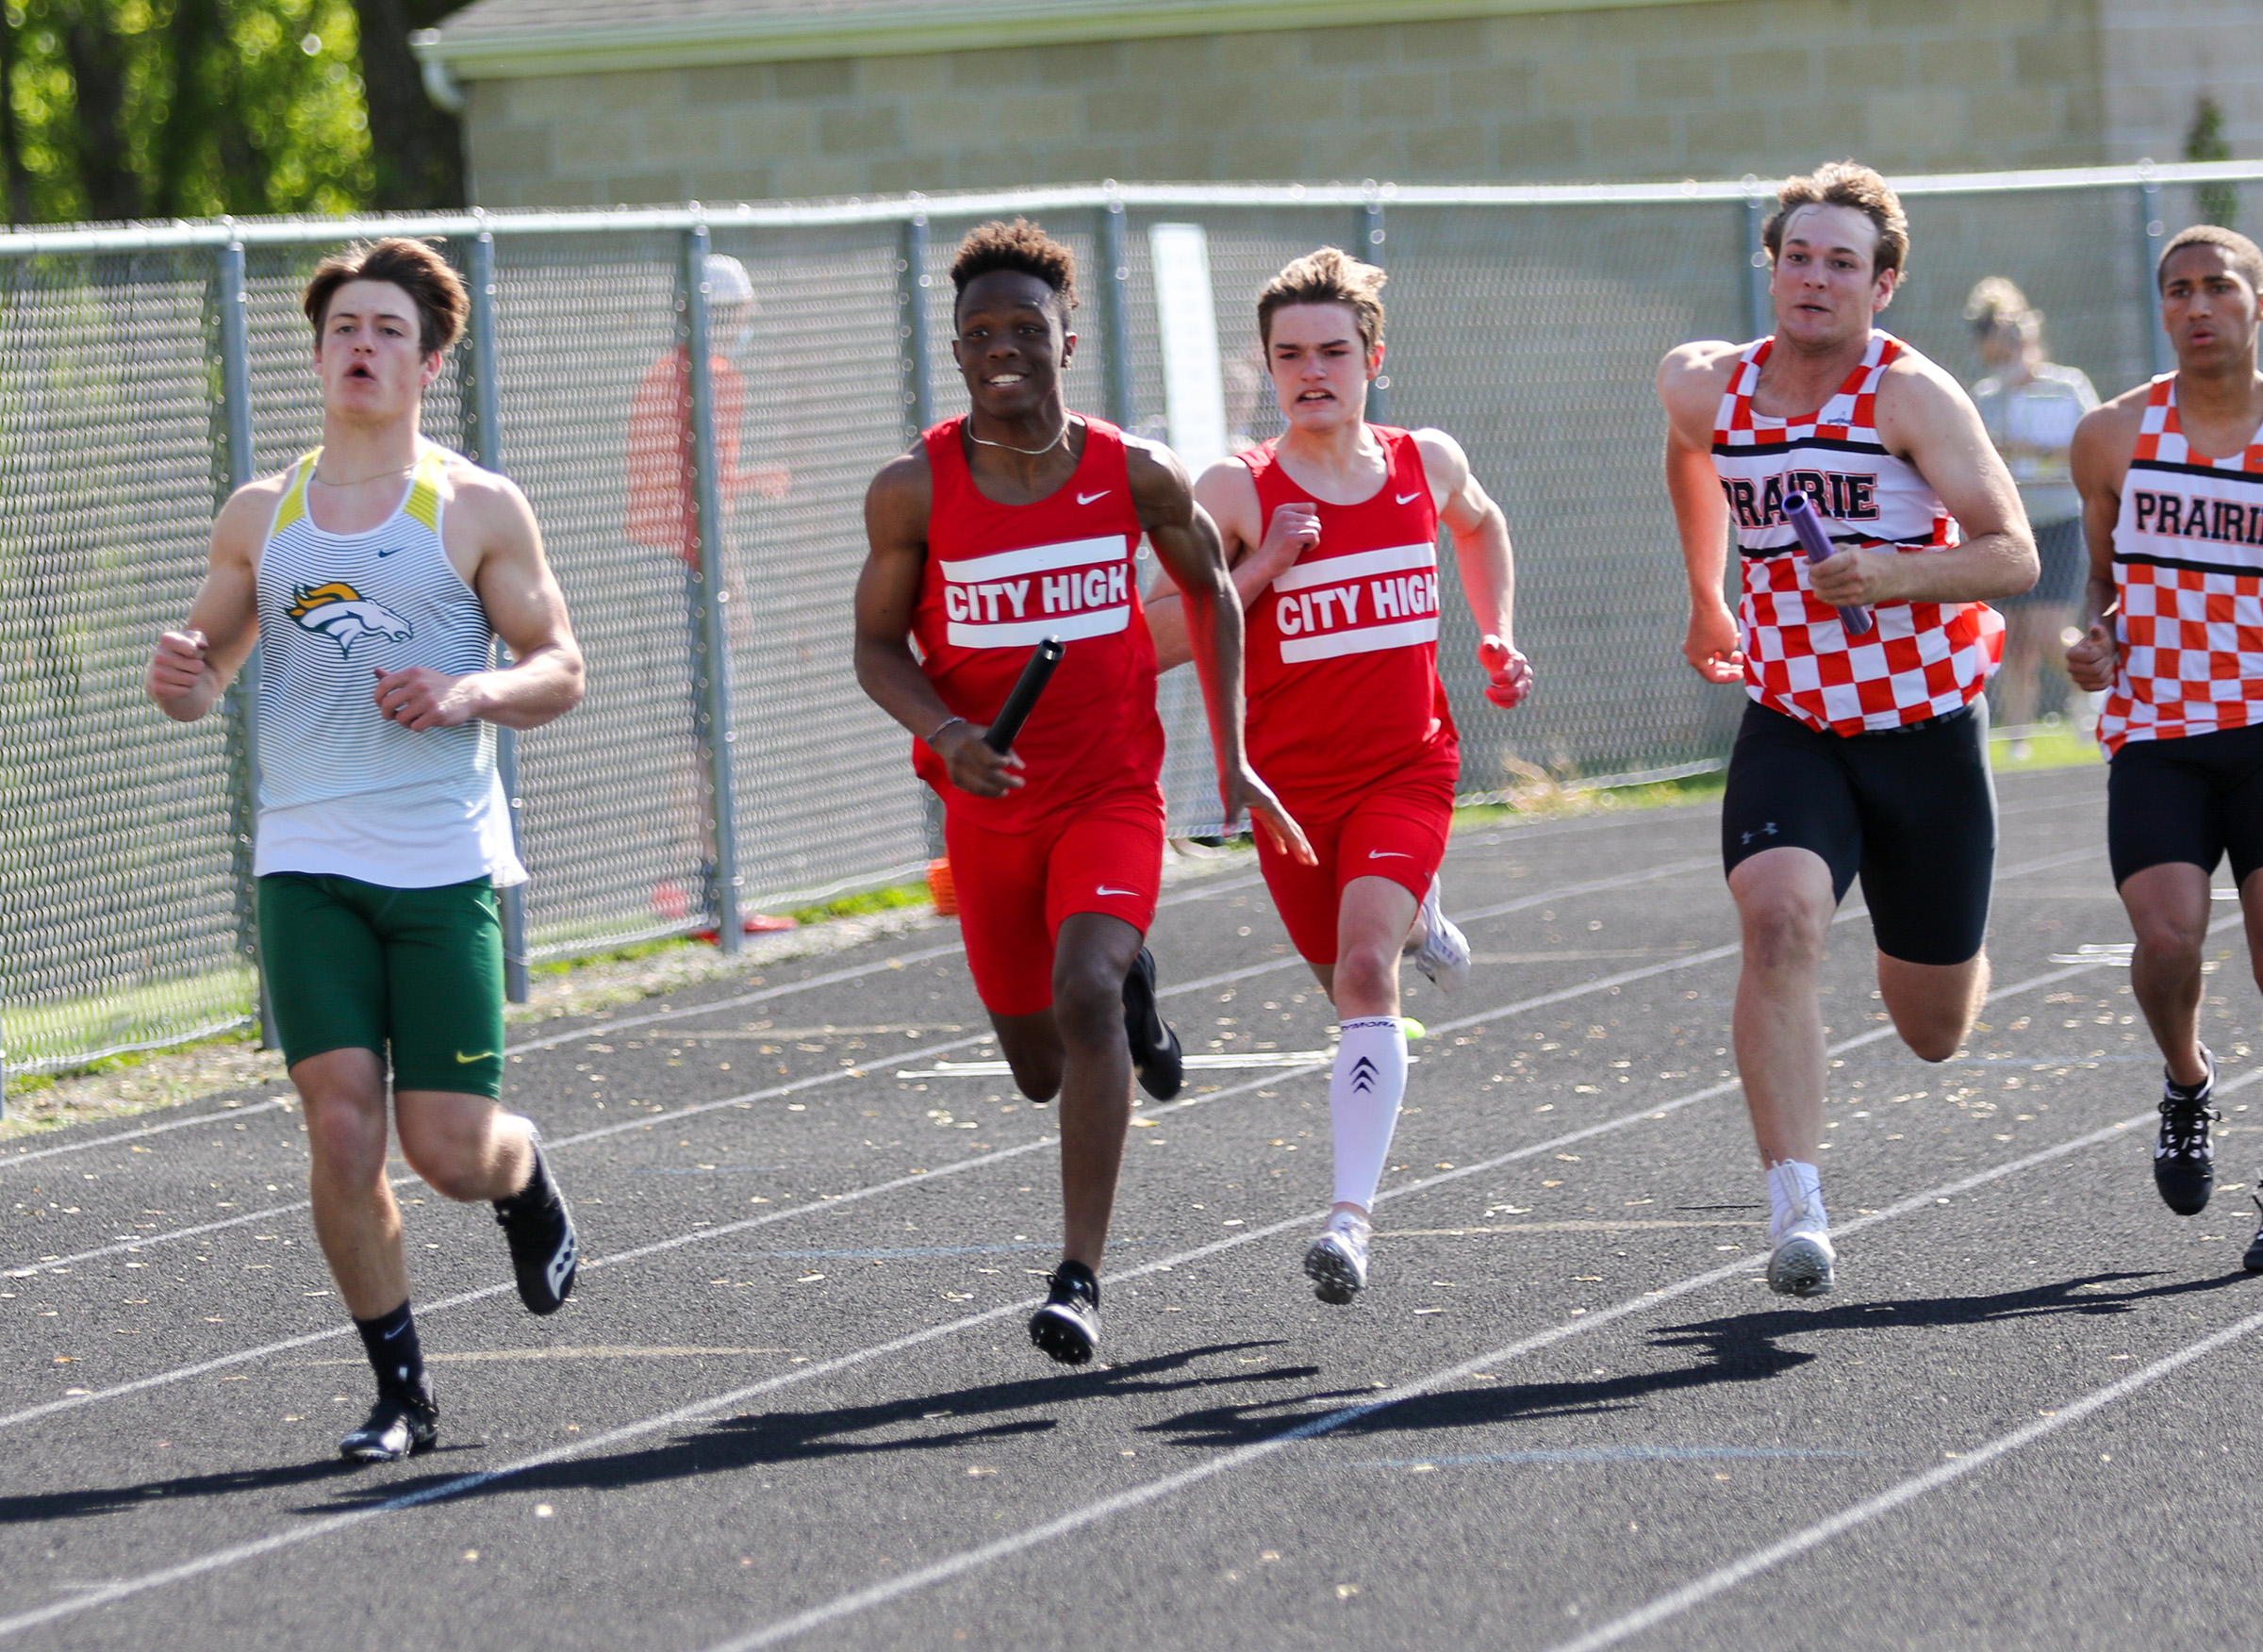 Relays Highlight Strong Performance For City High at State Qualifying